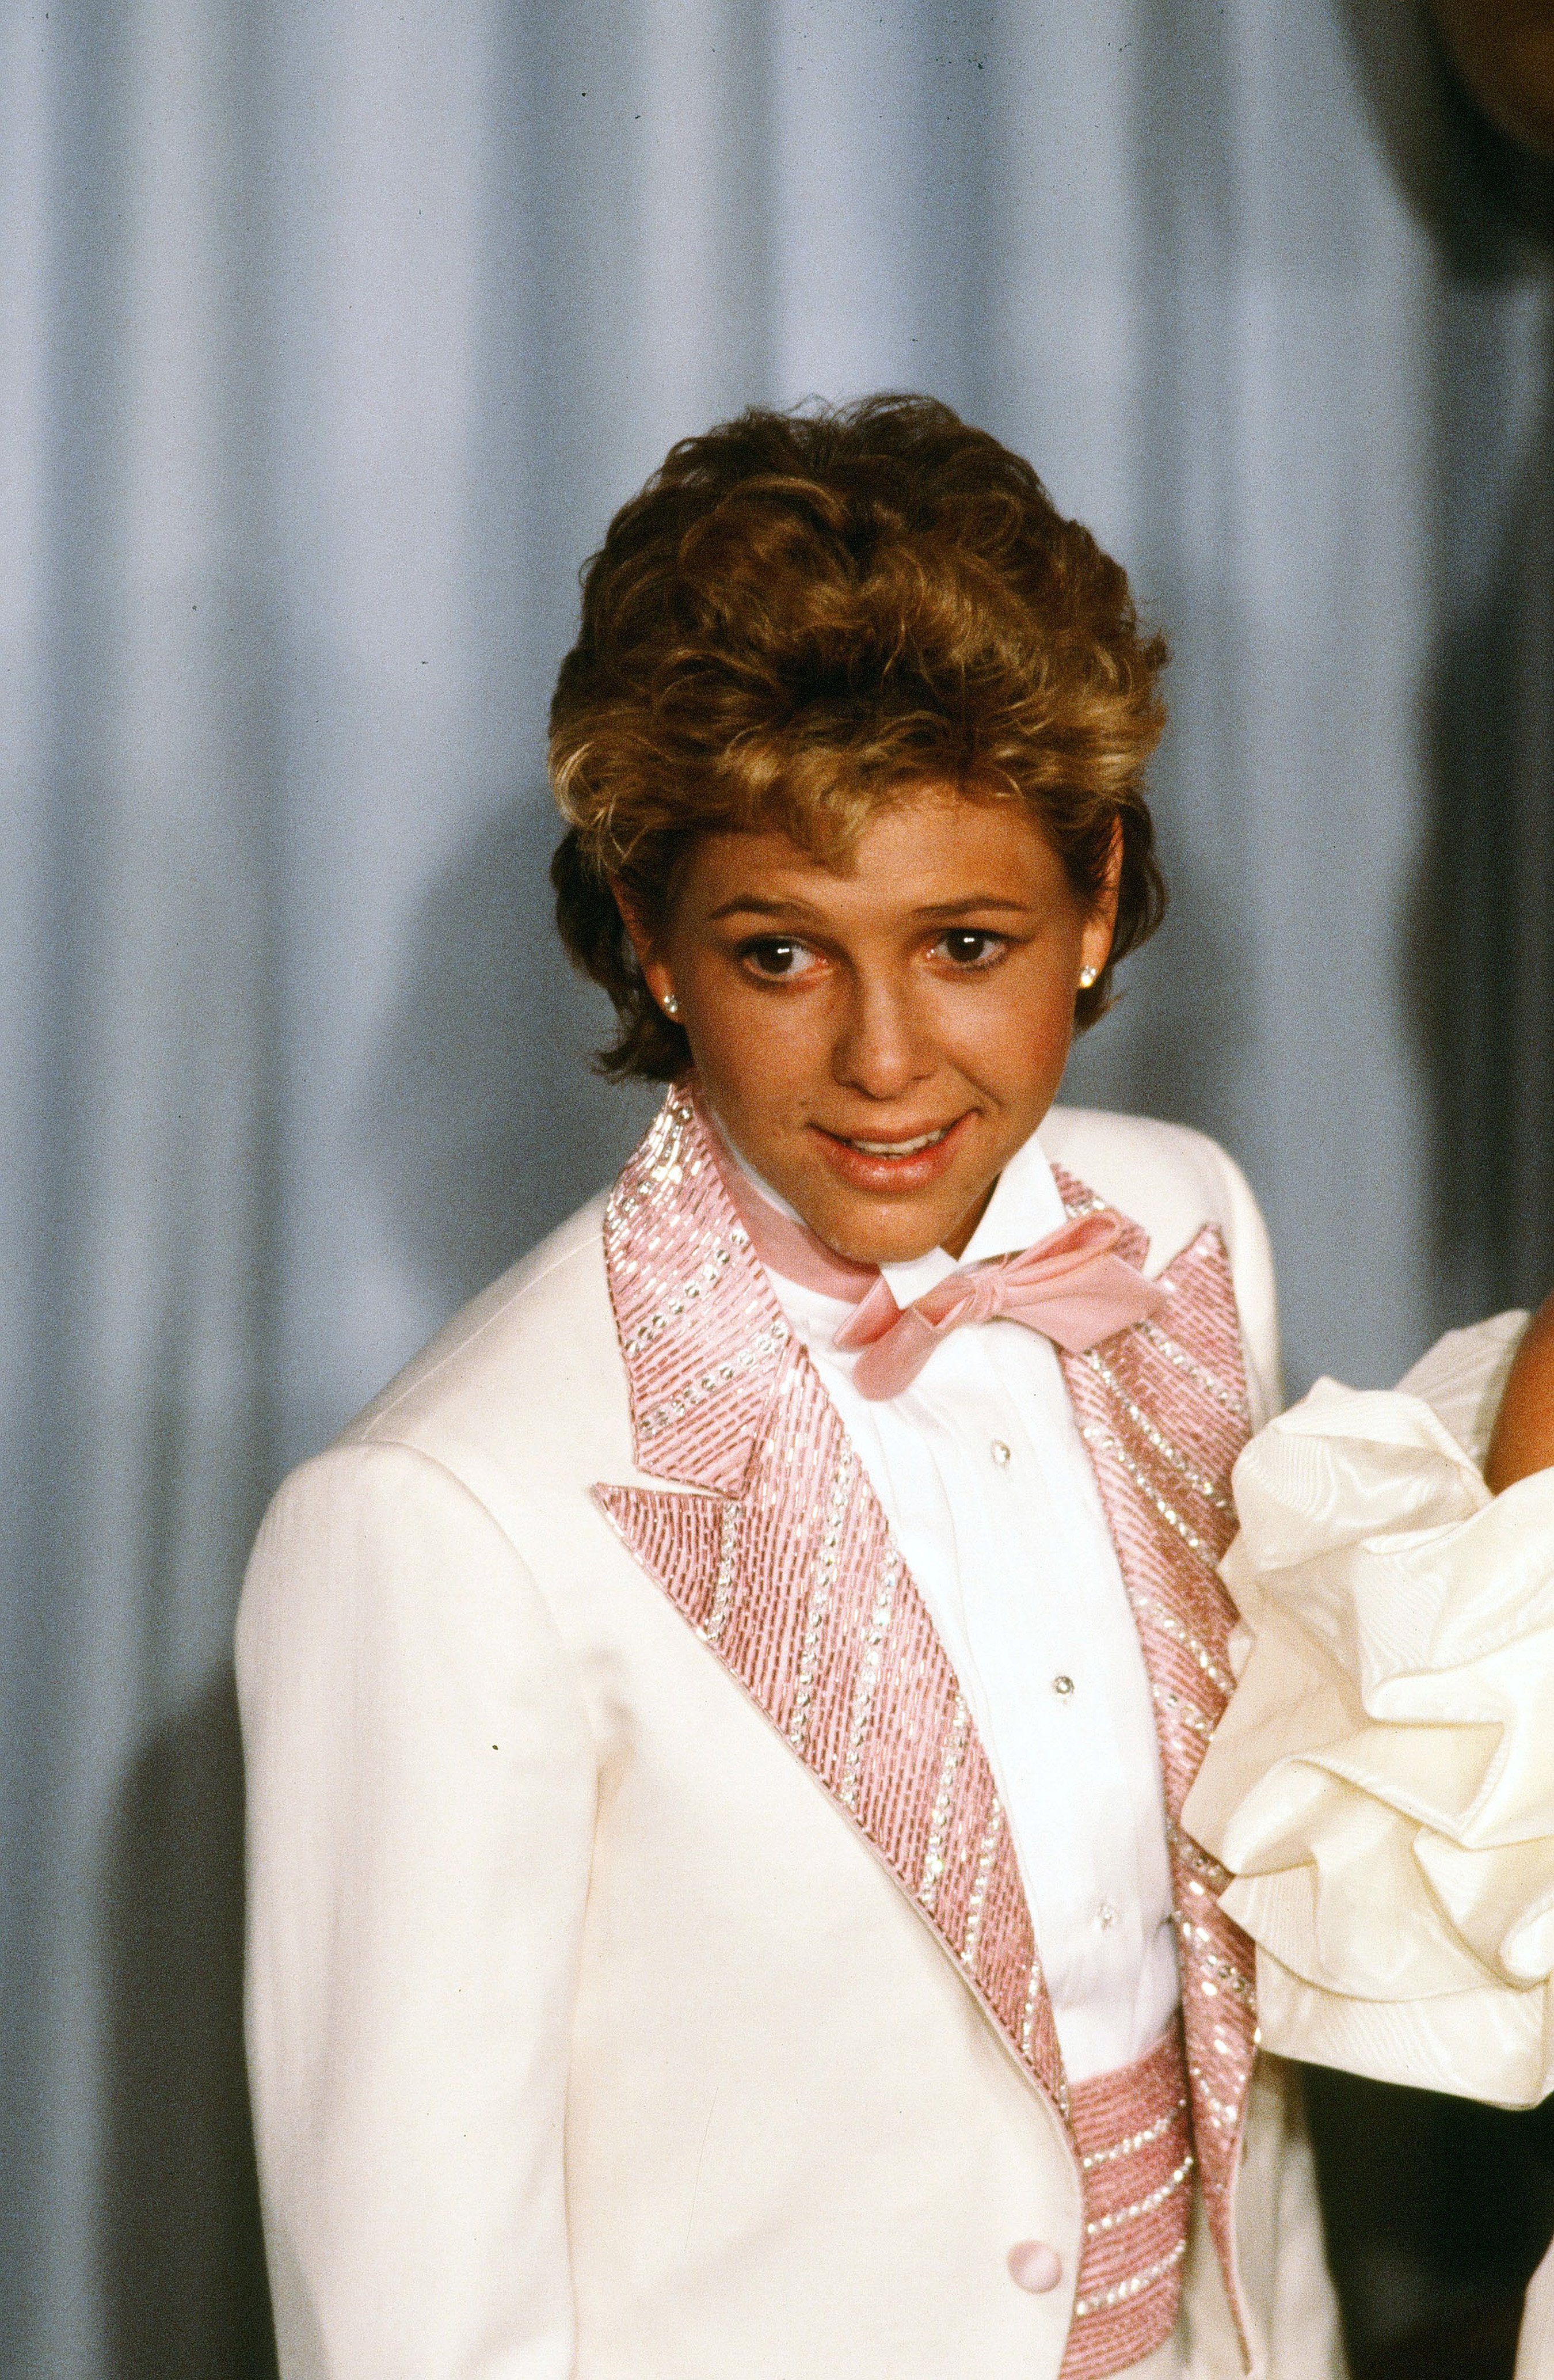 Kristy McNichol poses backstage during the 55th Academy Awards on April 11, 1983, in Los Angeles, California. | Source: Michael Montfort/Michael Ochs Archives/Getty Images